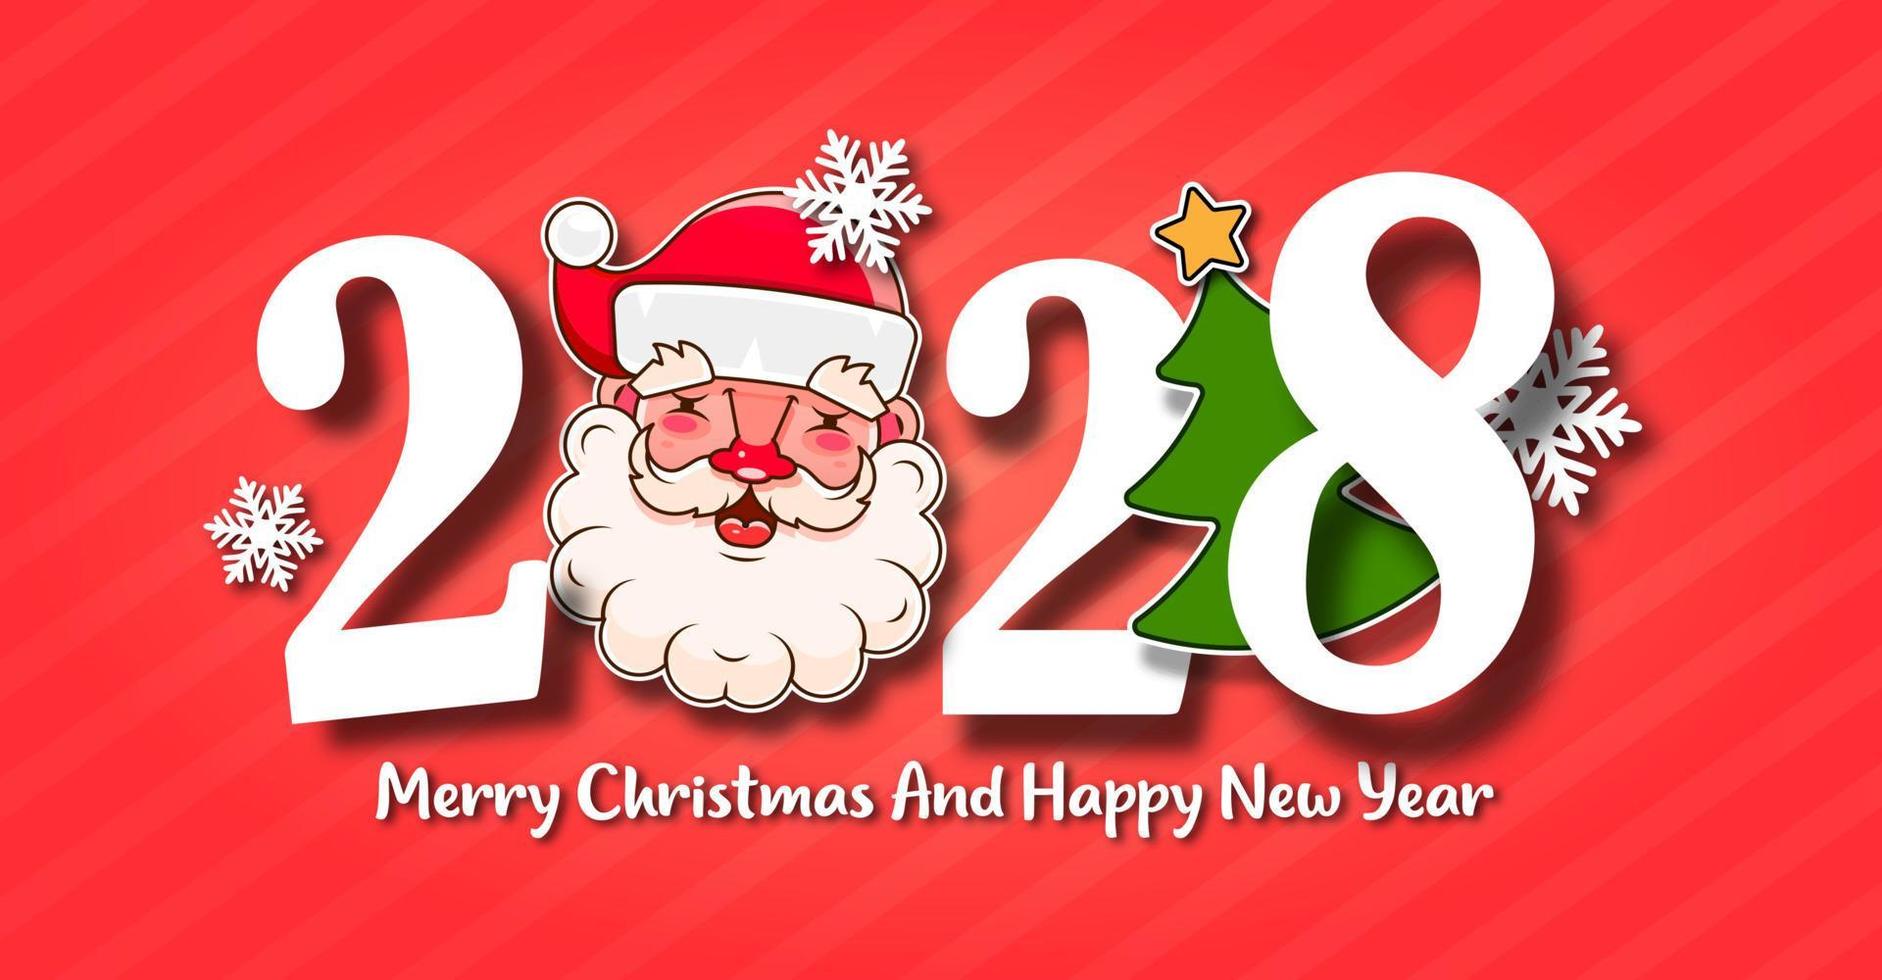 I Wish You A Merry Christmas And Happy New Year Vintage Background With Typography. 2028 vector